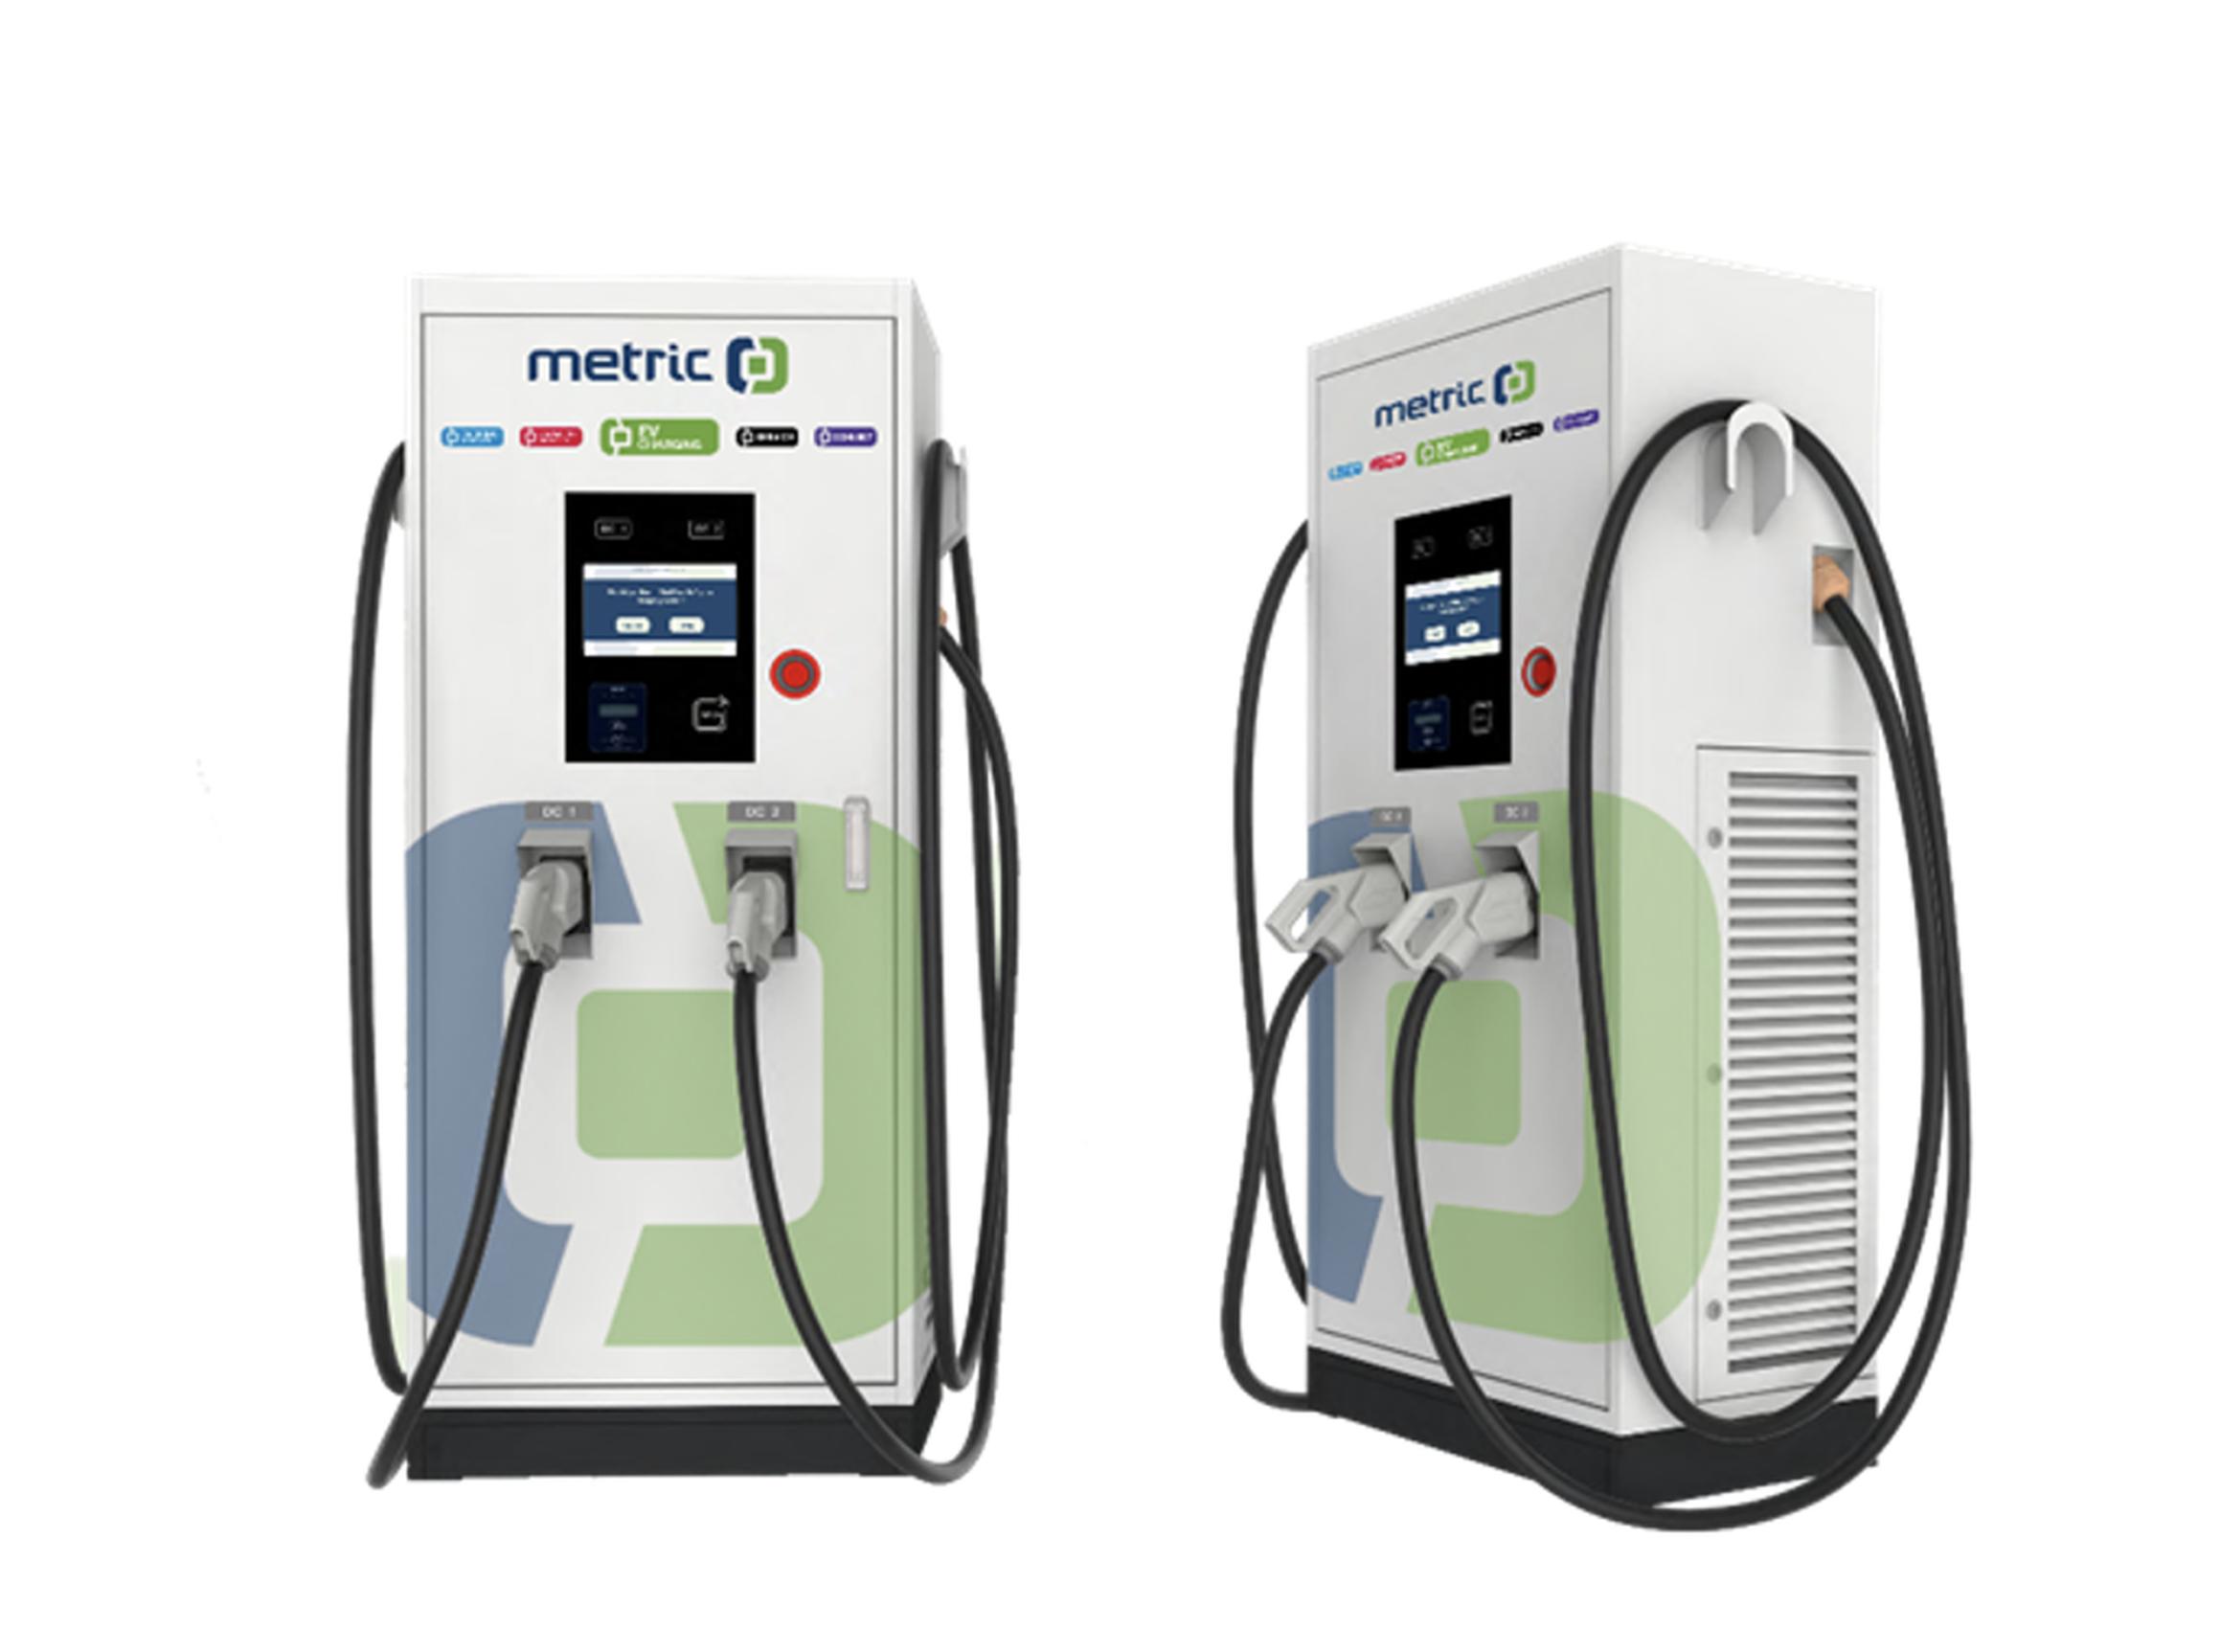 Metric chargepoints